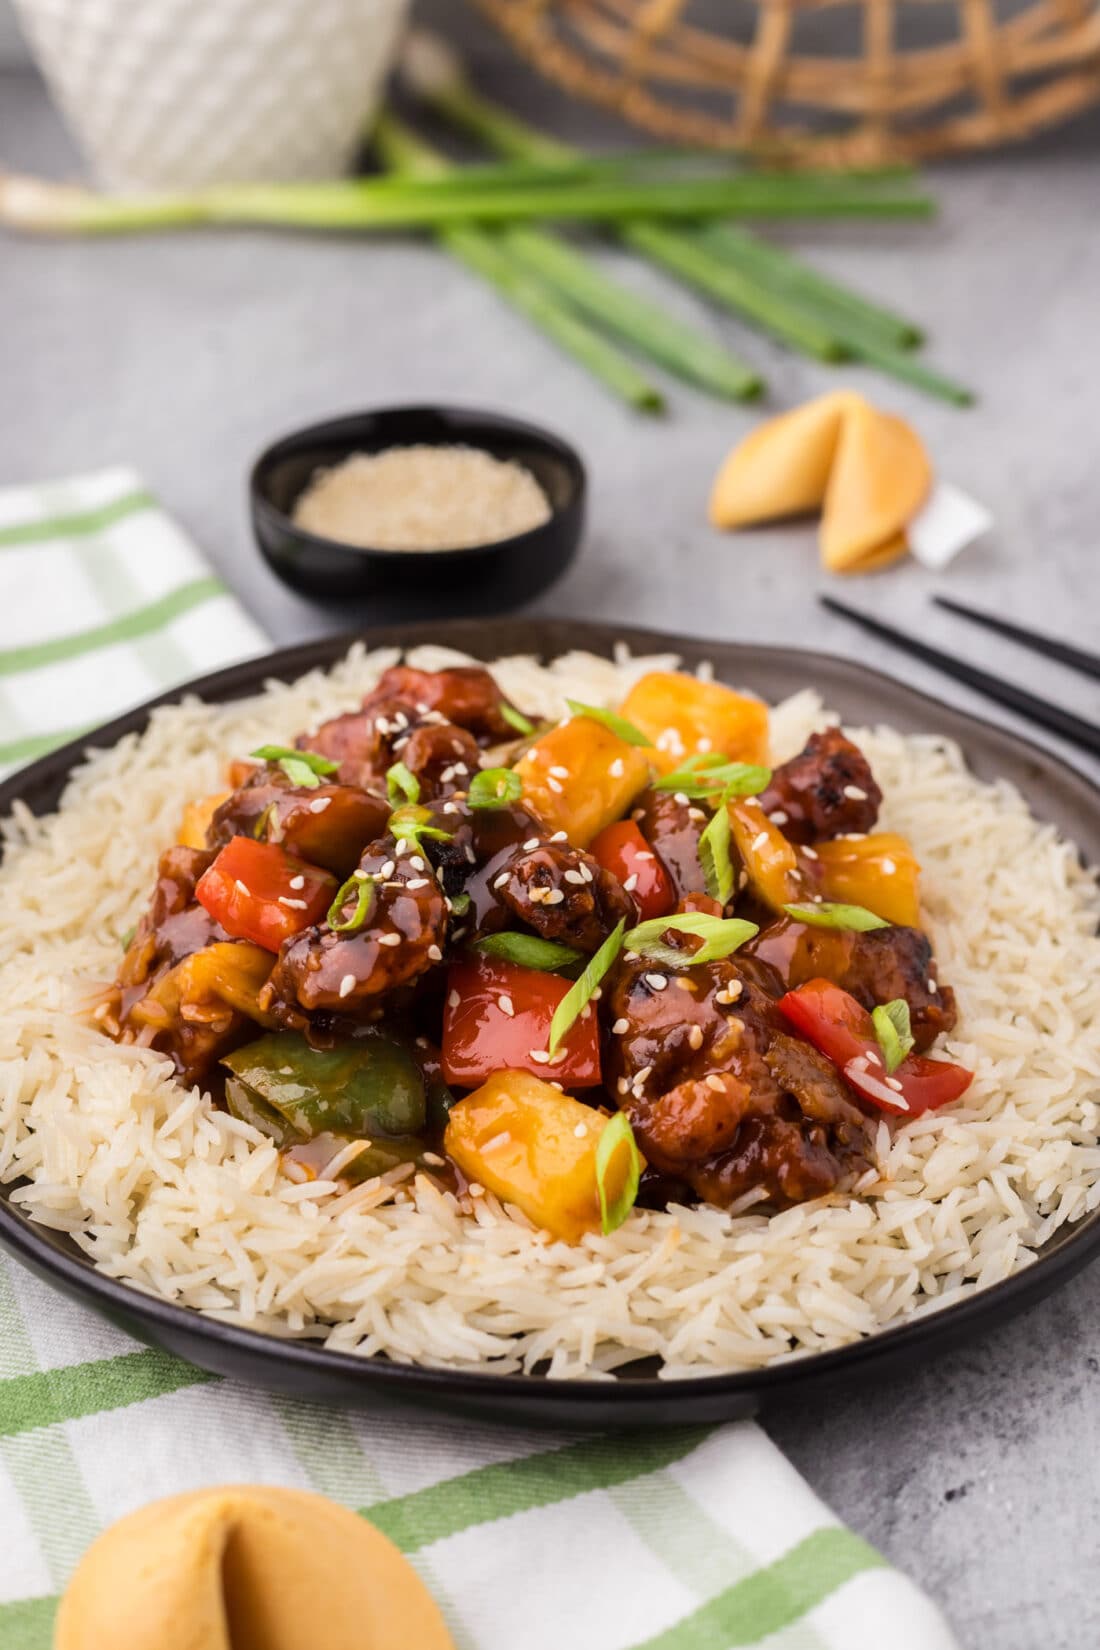 Plate of Sweet and Sour Pork and rice on a plate